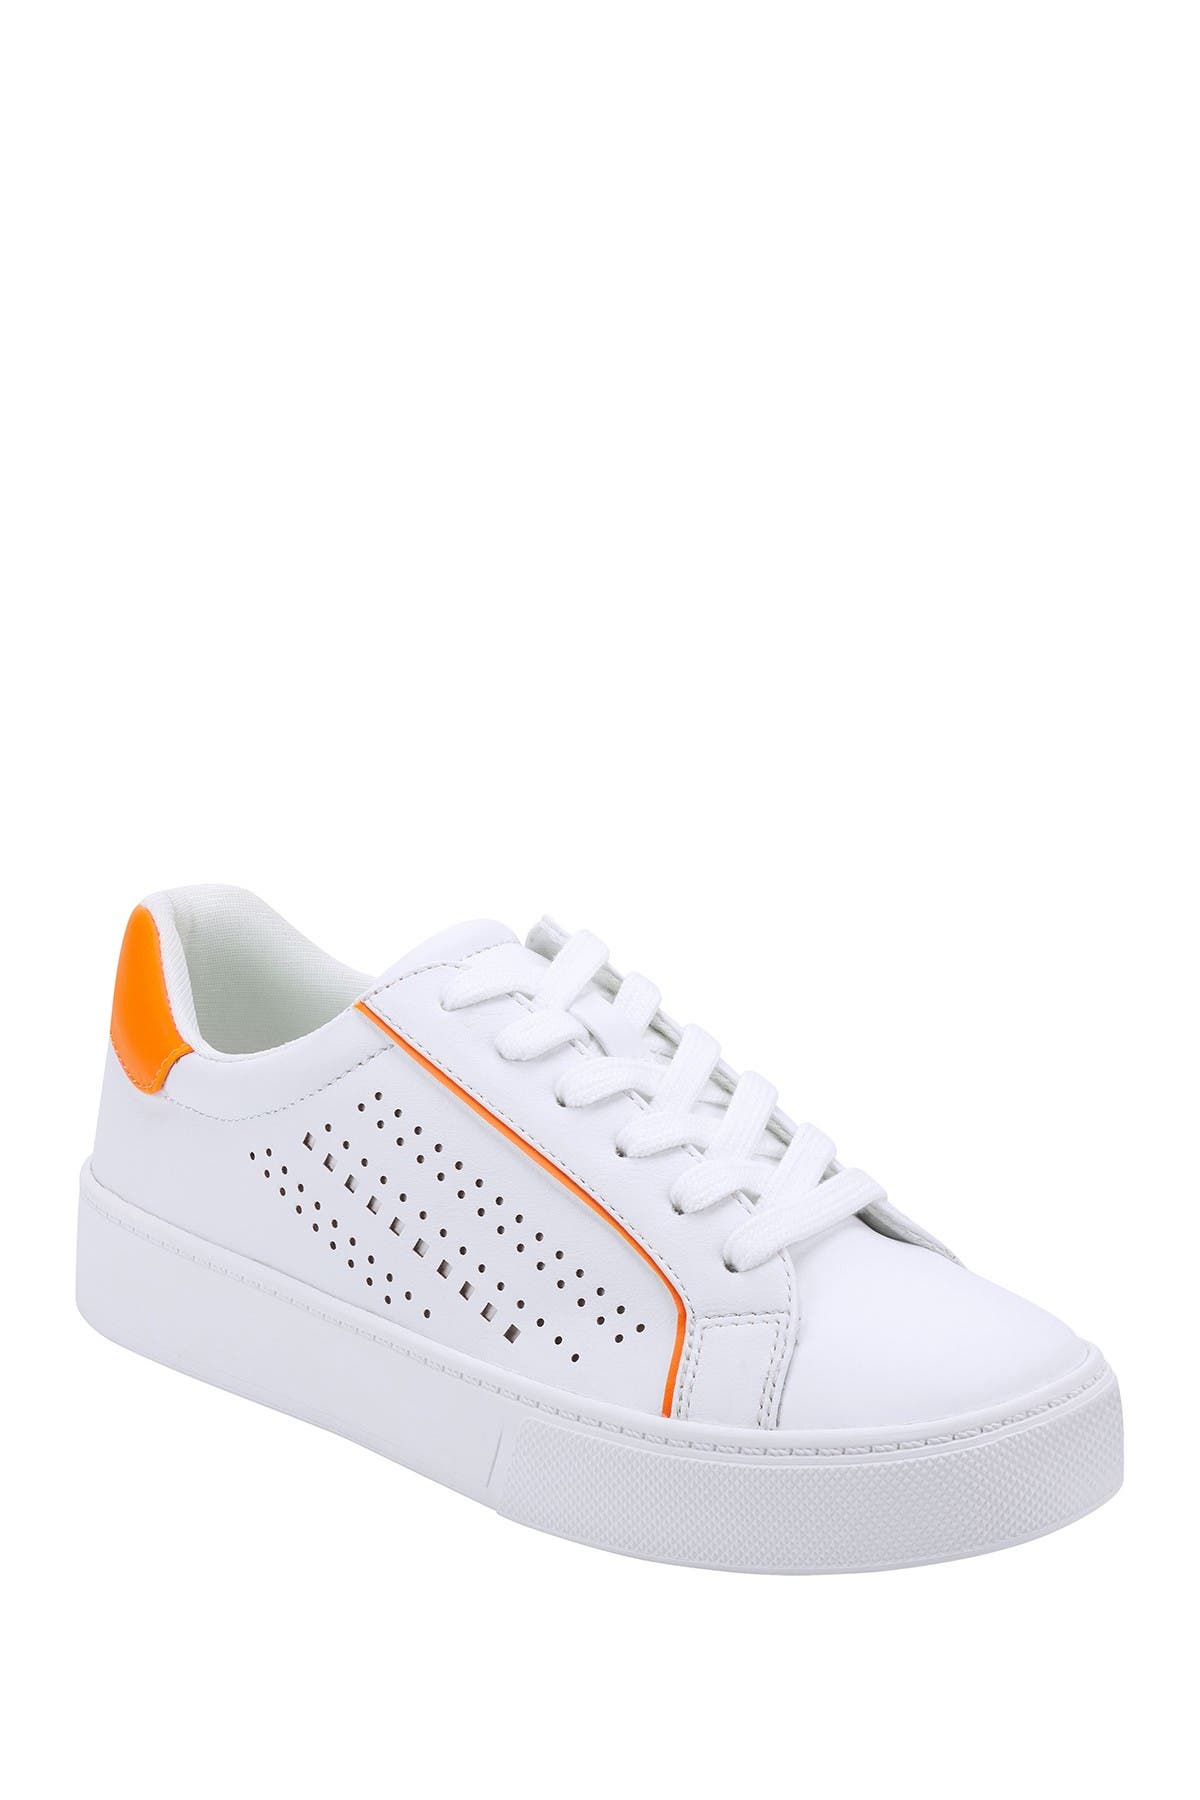 marc fisher white sneakers